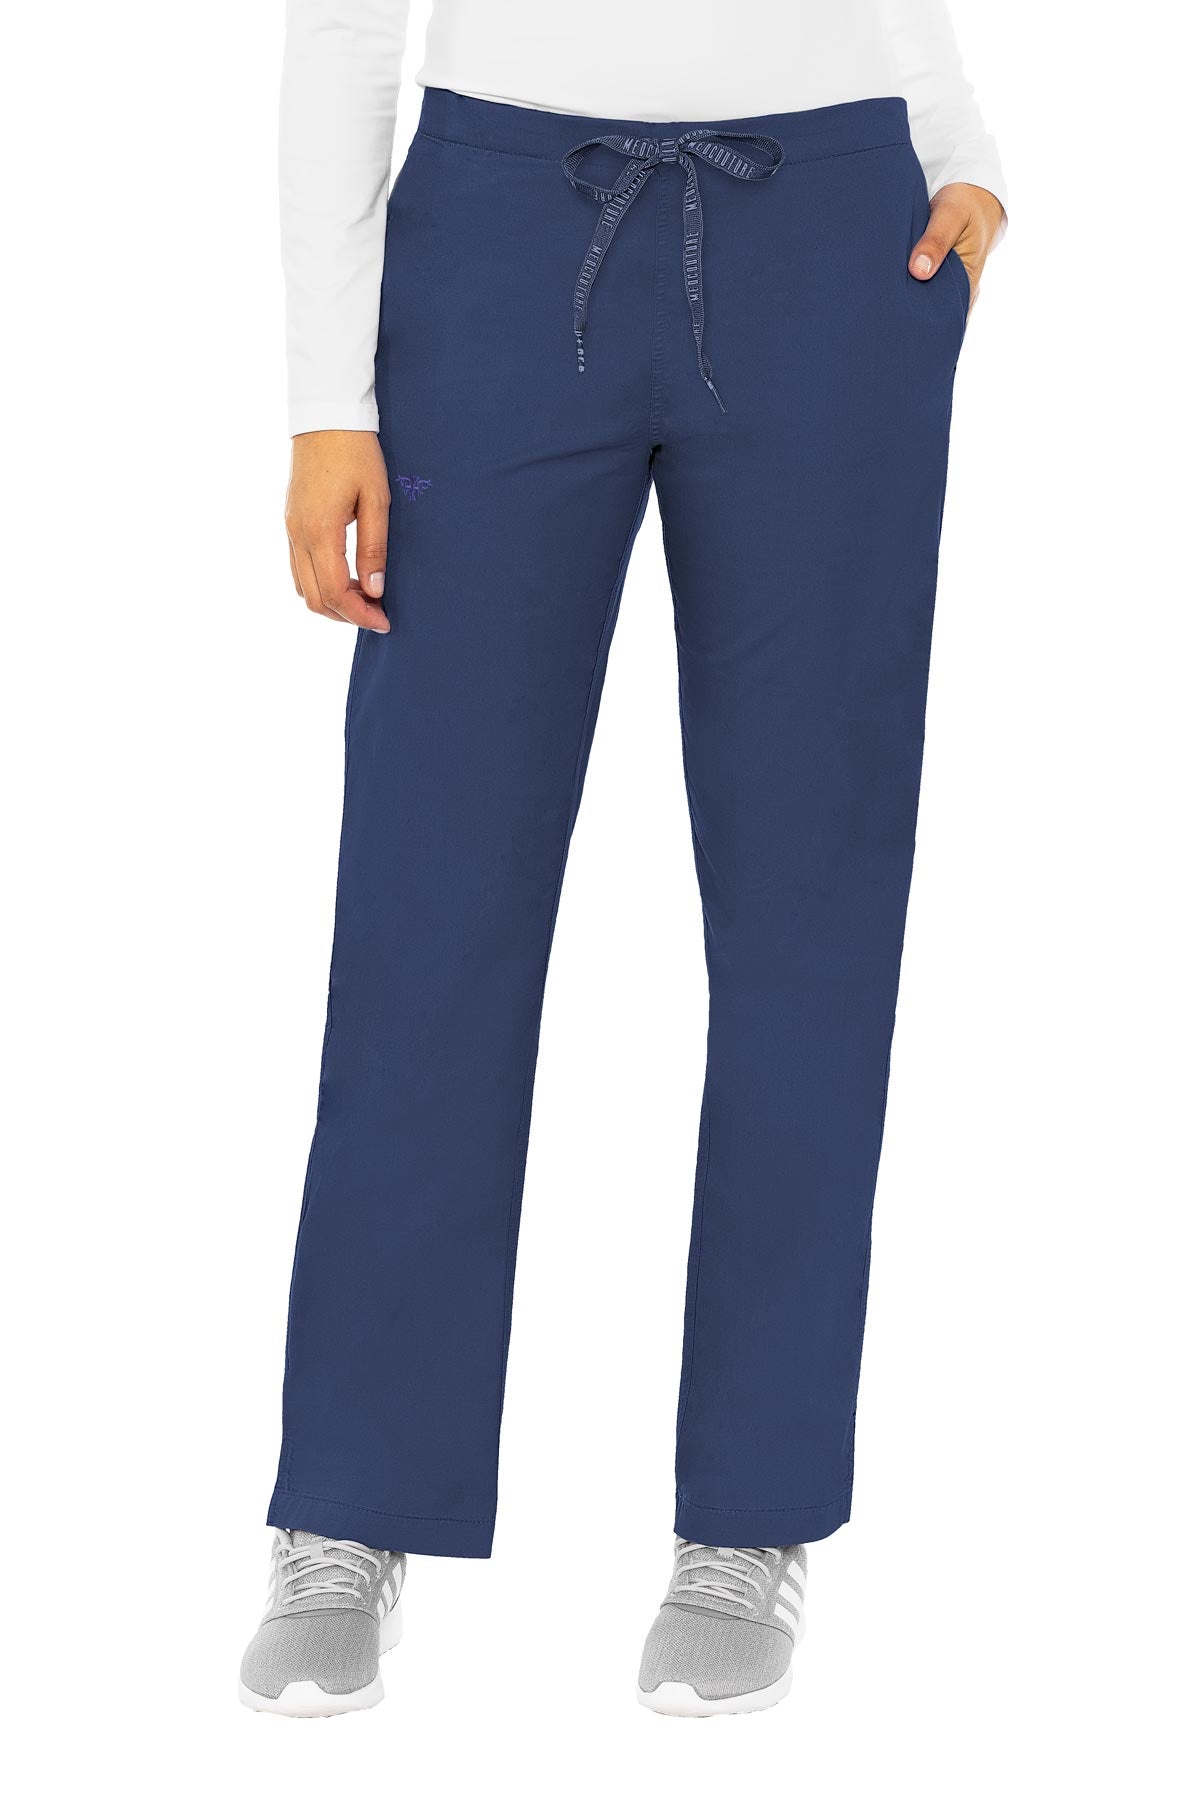 Med Couture Signature Drawstring Pant in Navy at Parker's Clothing and Shoes. Med Couture Sale Scrub Pants.